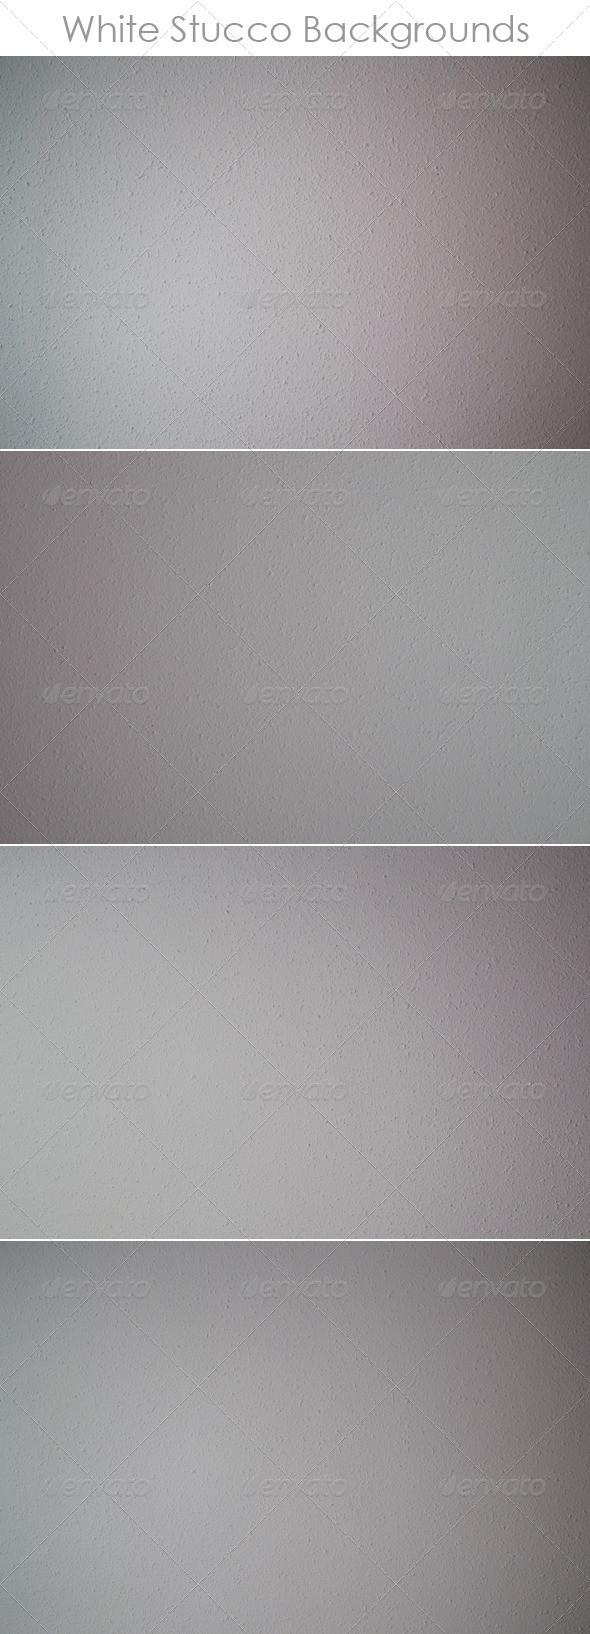 White 20stucco 20backgrounds